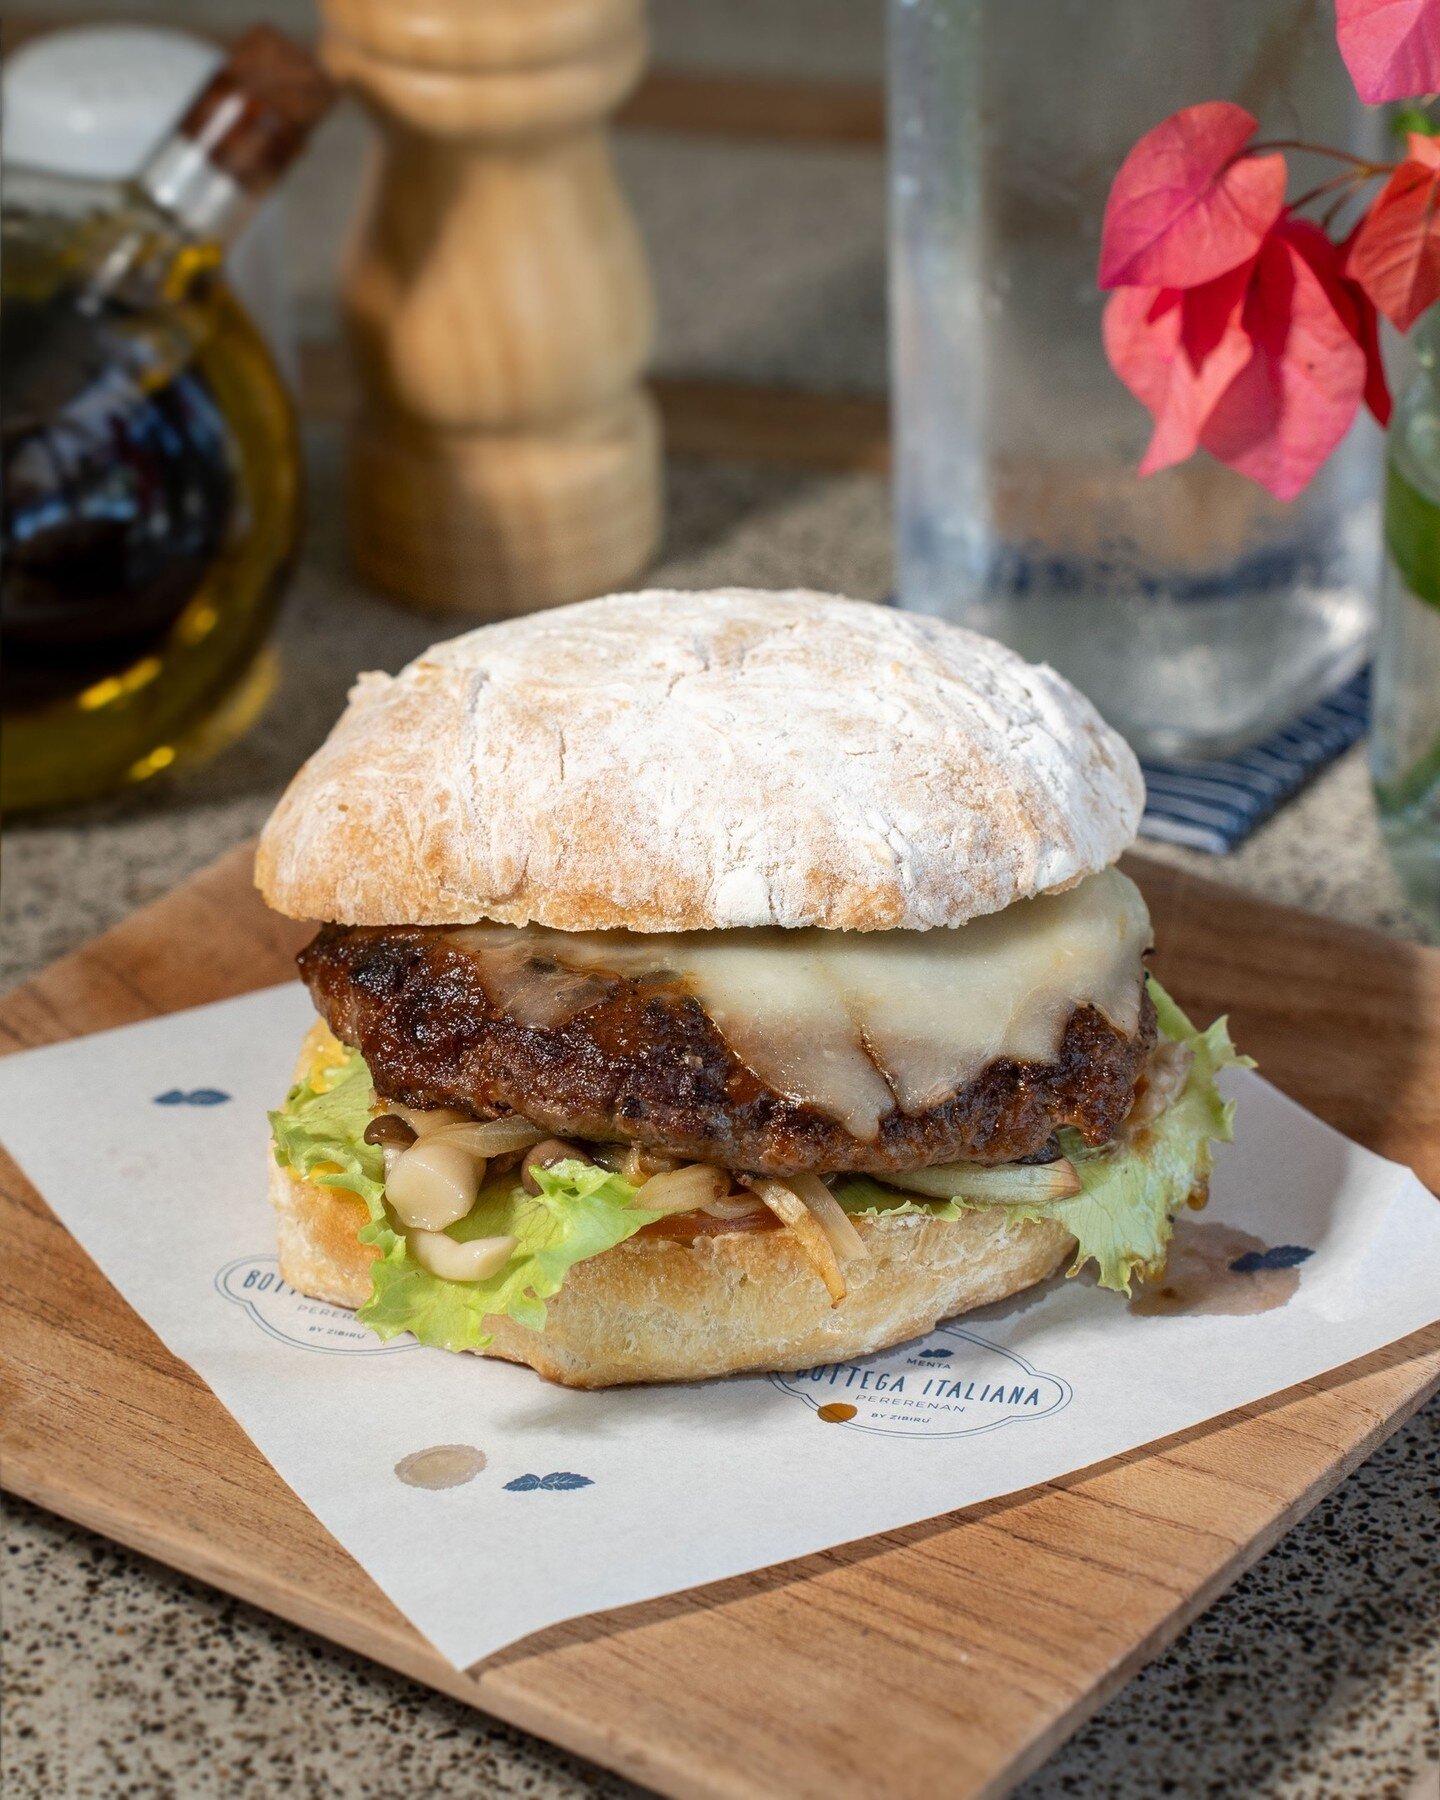 🛑 Stop scrolling 🛑 New arrival alert!⁠
⁠
Look what's on the menu 👀  LA SVIZZERA, an Italian-style burger made of 150g Australian beef patty cooked to melt-in-your-mouth perfection, warm and silky mozzarella cheese, crisp lettuce and juicy tomato s